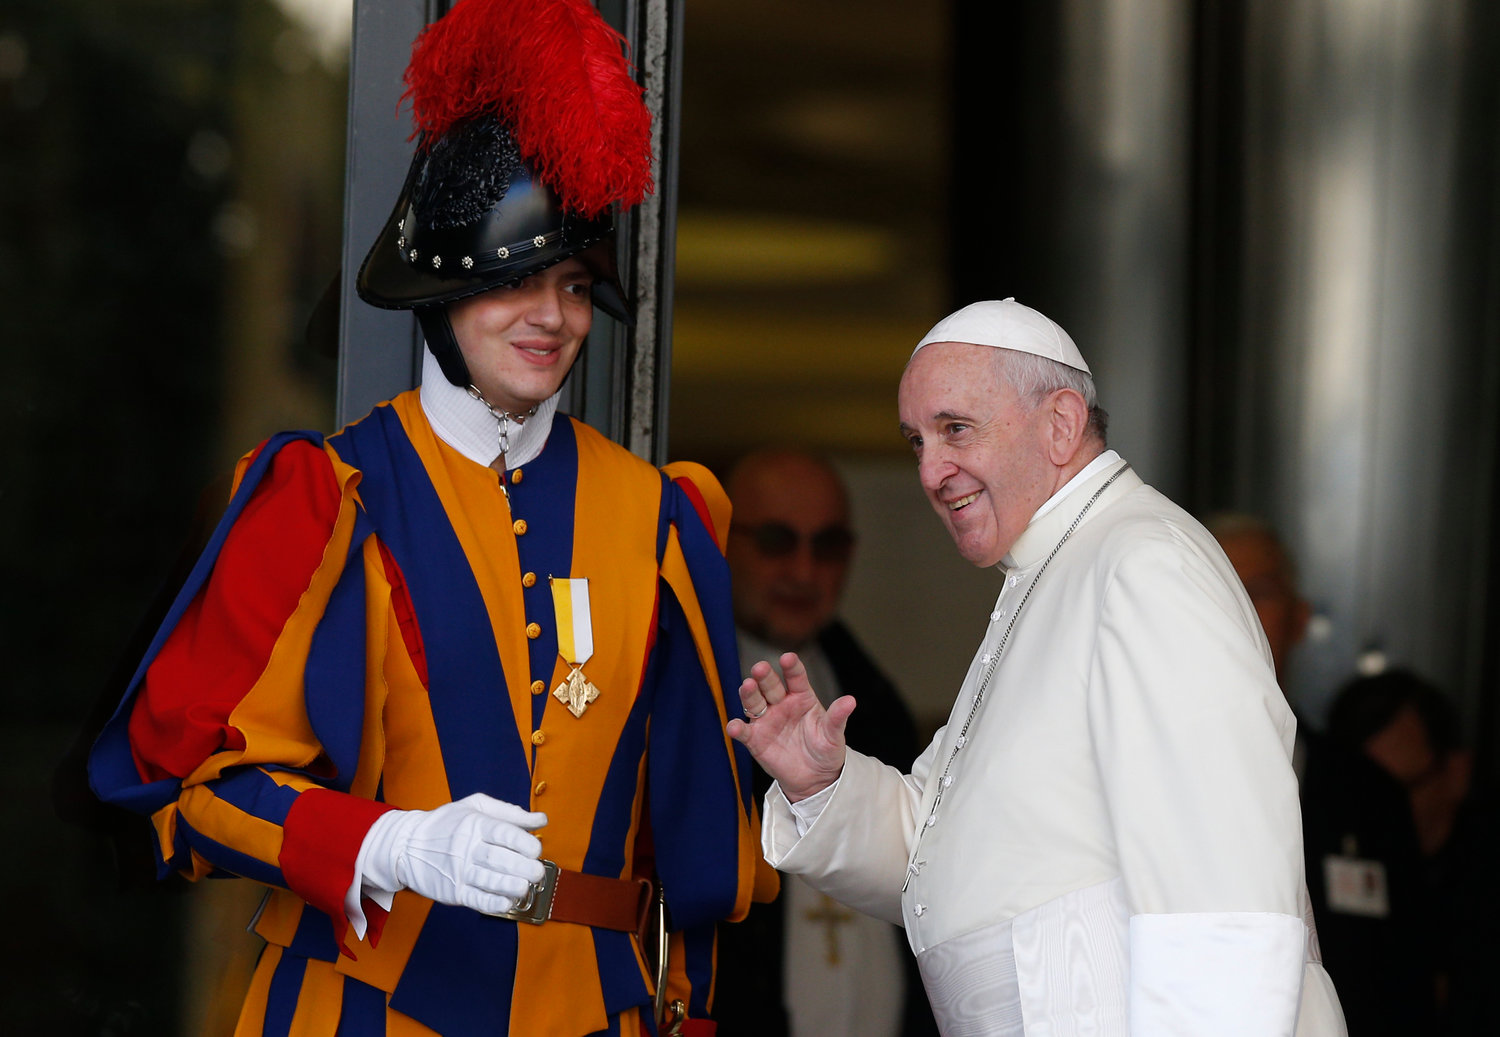 Pope Francis passes a Swiss Guard as he arrives for a session of the Synod of Bishops for the Amazon at the Vatican Oct. 15, 2019.